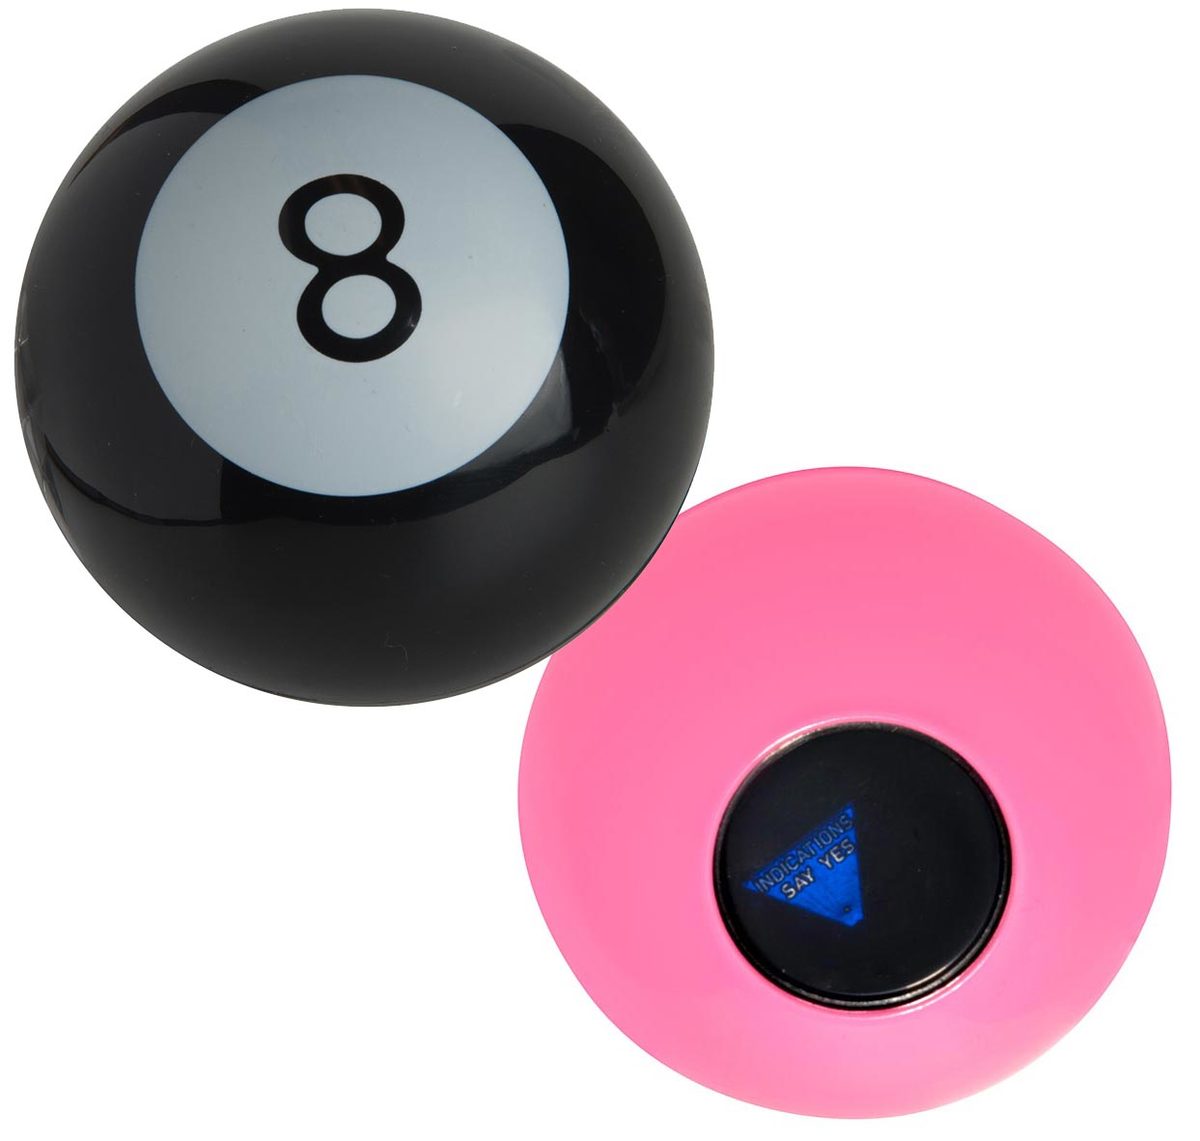 Promotional Small Magic 8 Ball Decision Maker